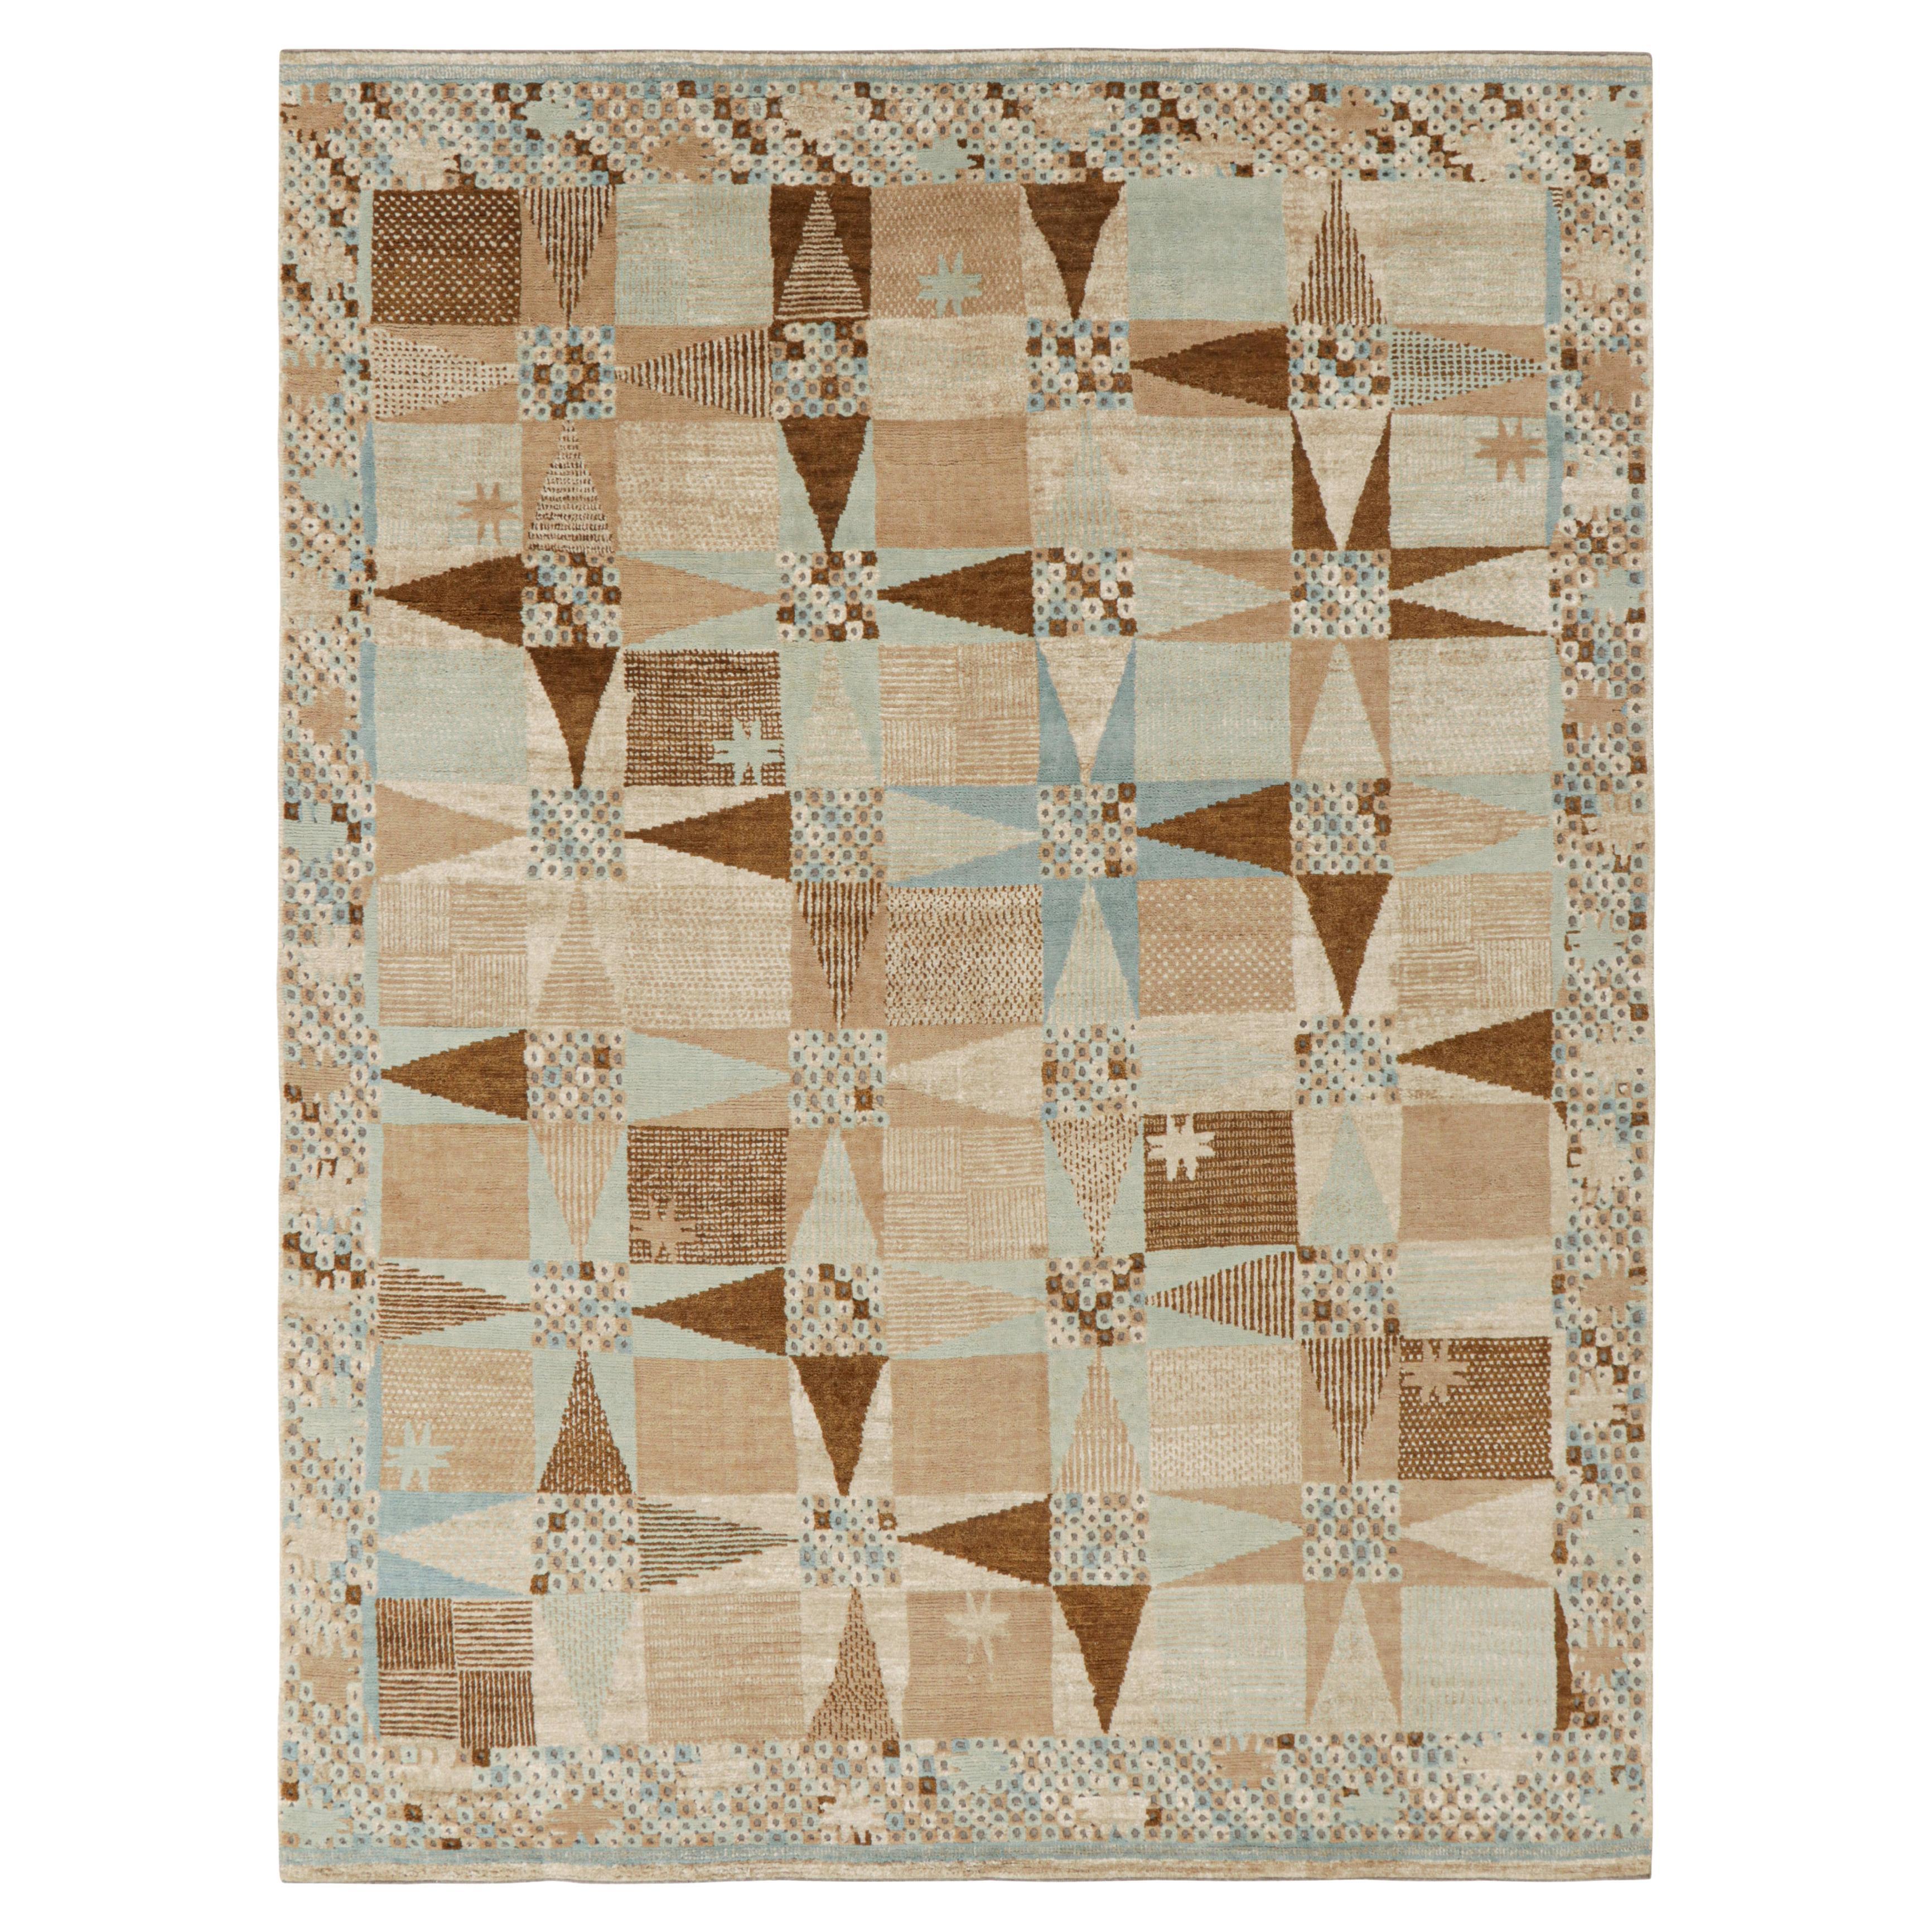 Rug & Kilim’s Scandinavian Style Rug in Beige-Brown and Blue Geometric Patterns For Sale